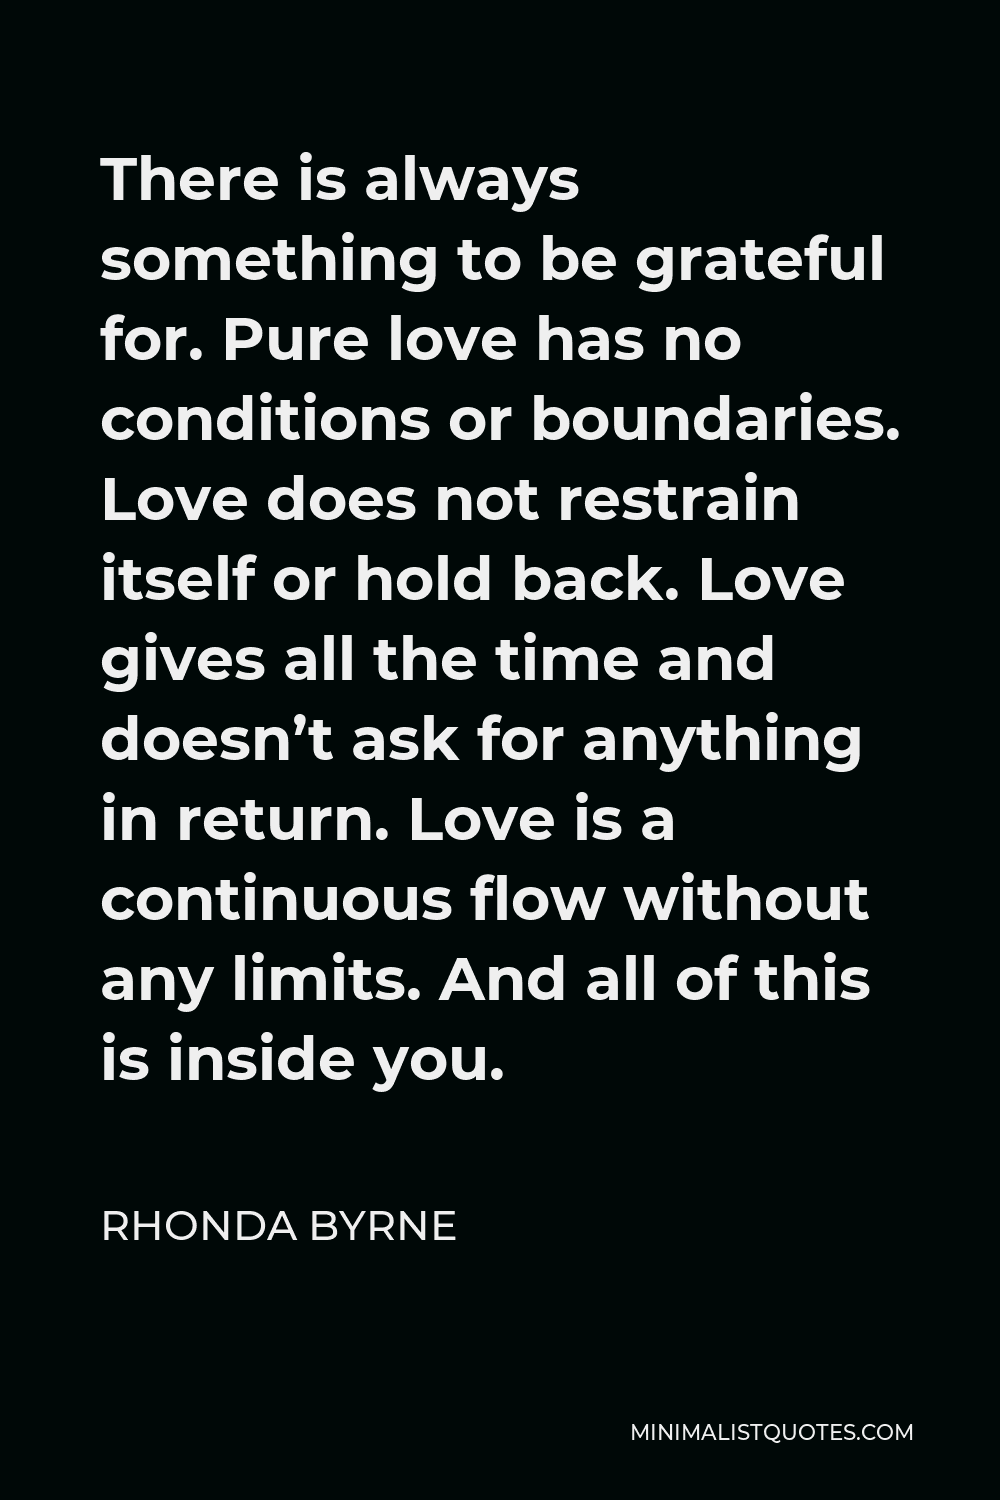 Rhonda Byrne Quote - There is always something to be grateful for. Pure love has no conditions or boundaries. Love does not restrain itself or hold back. Love gives all the time and doesn’t ask for anything in return. Love is a continuous flow without any limits. And all of this is inside you.